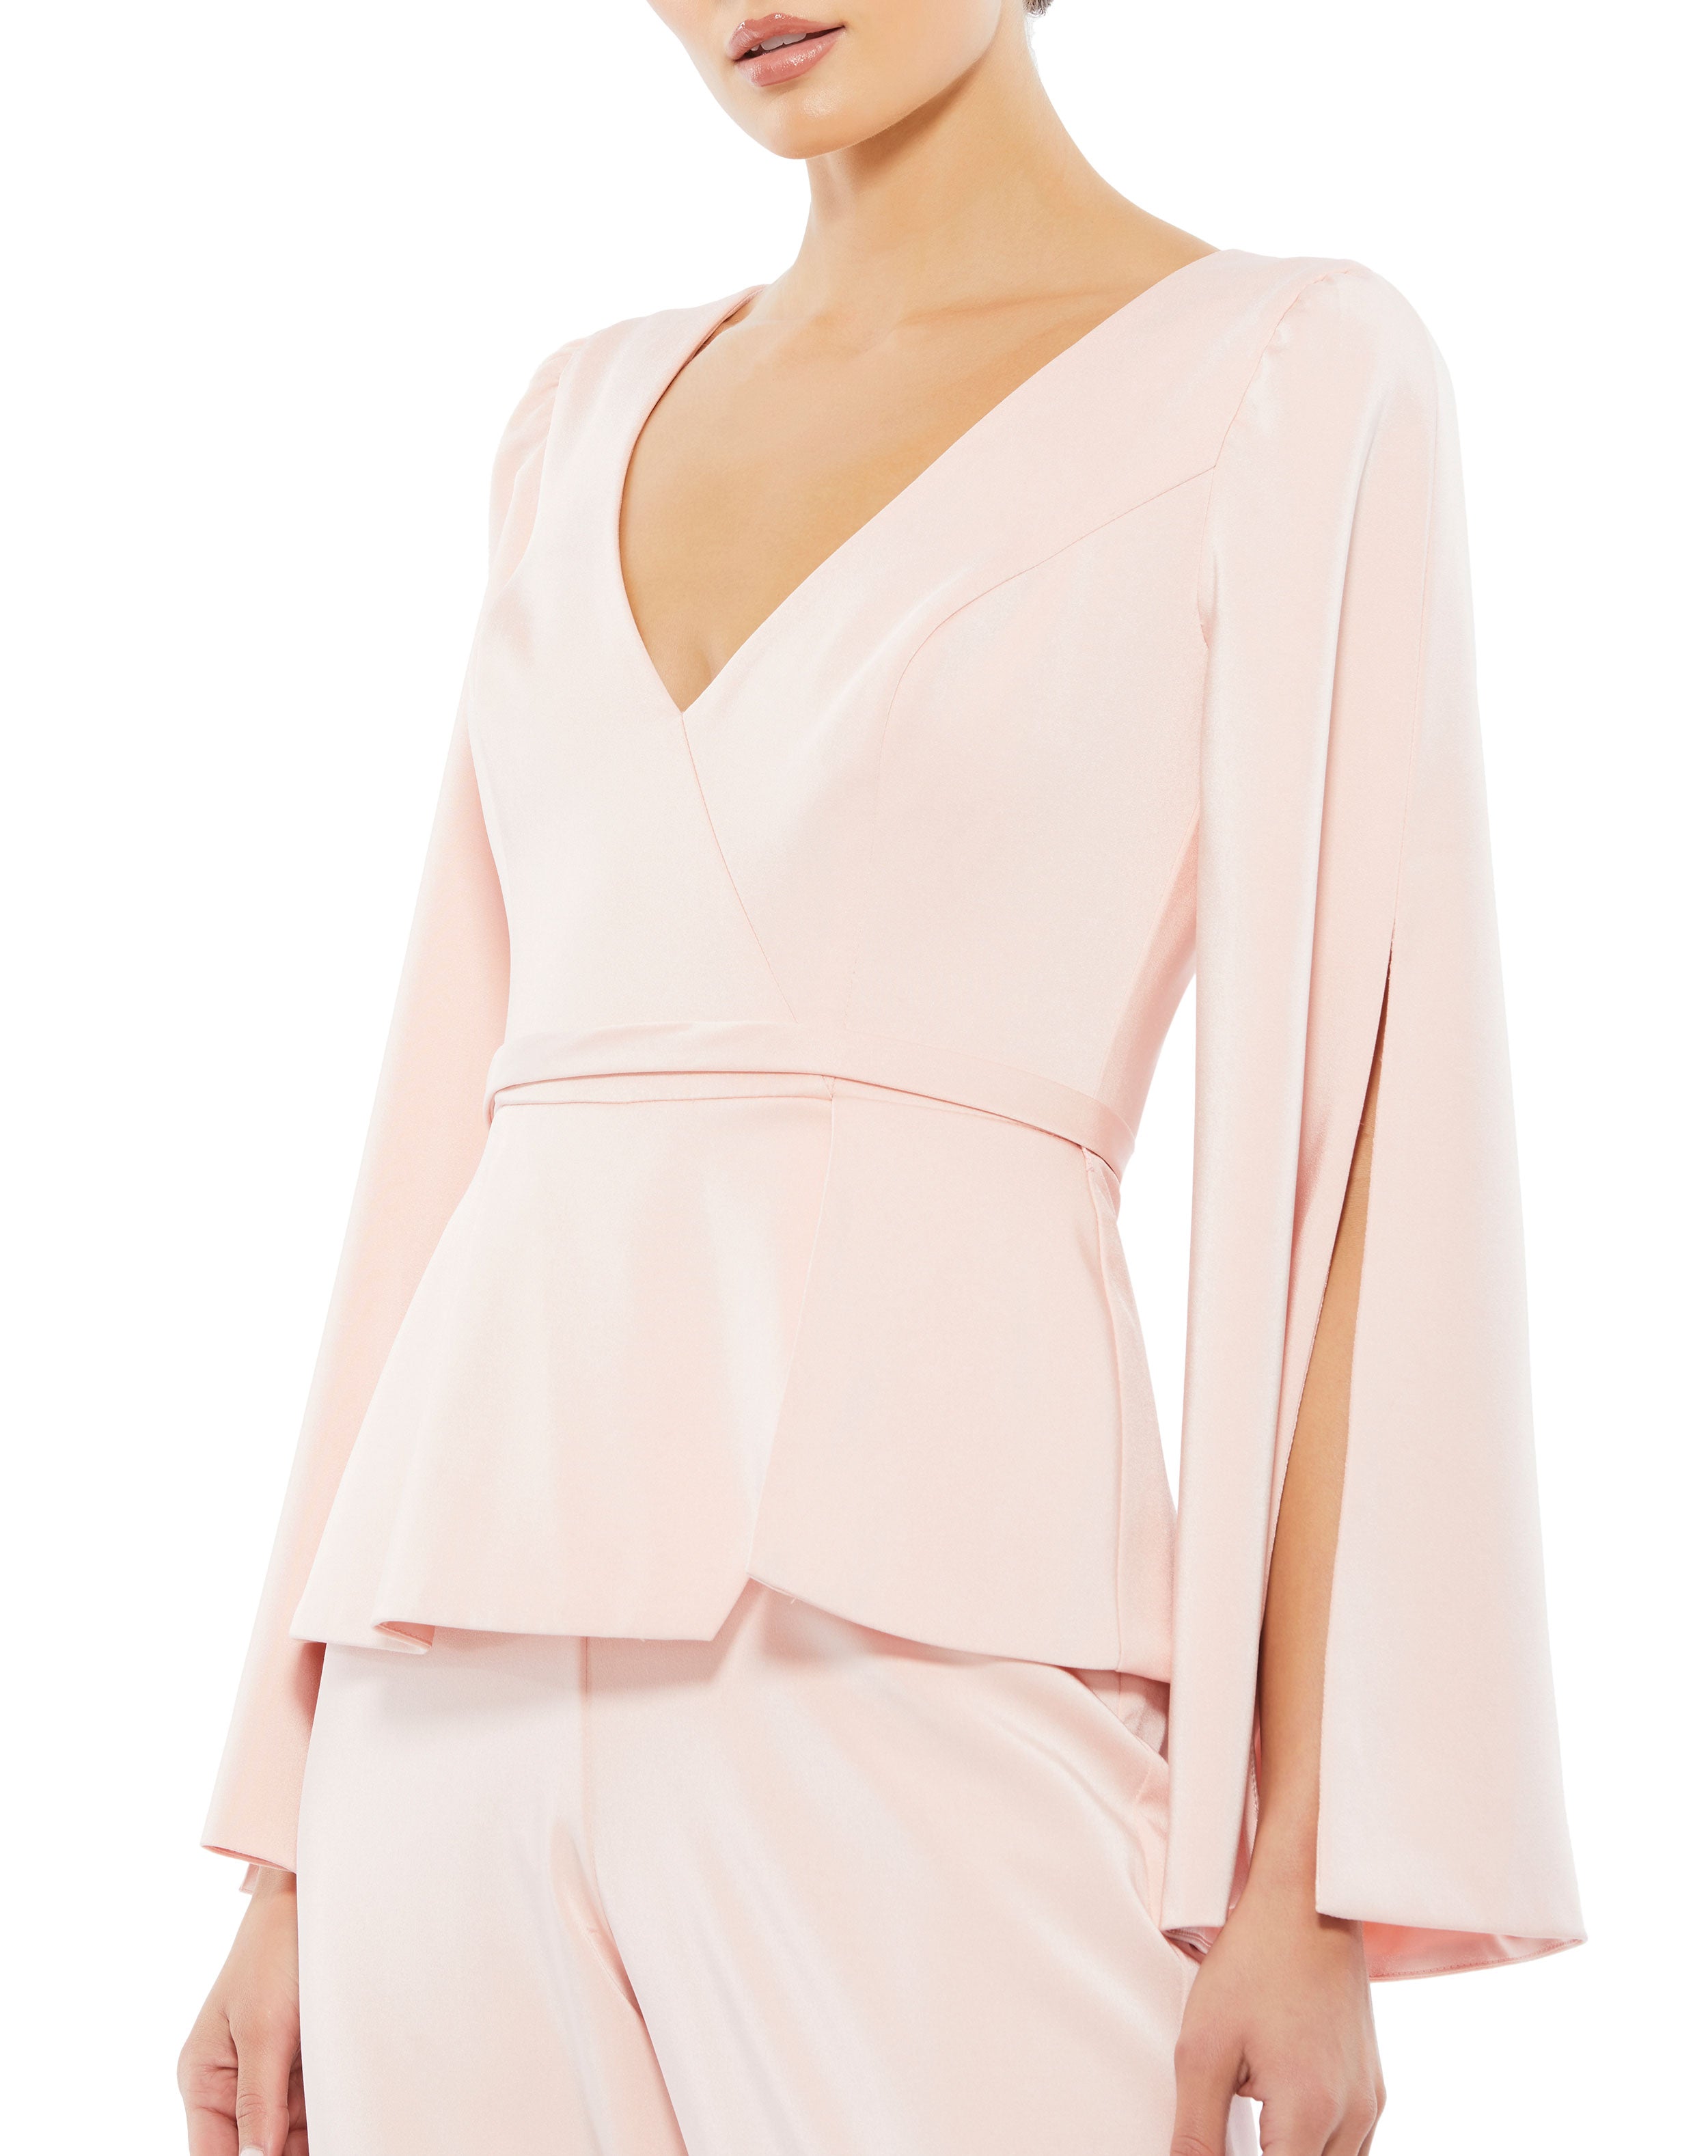 Long Sleeve Two Piece Crepe Pant Suit